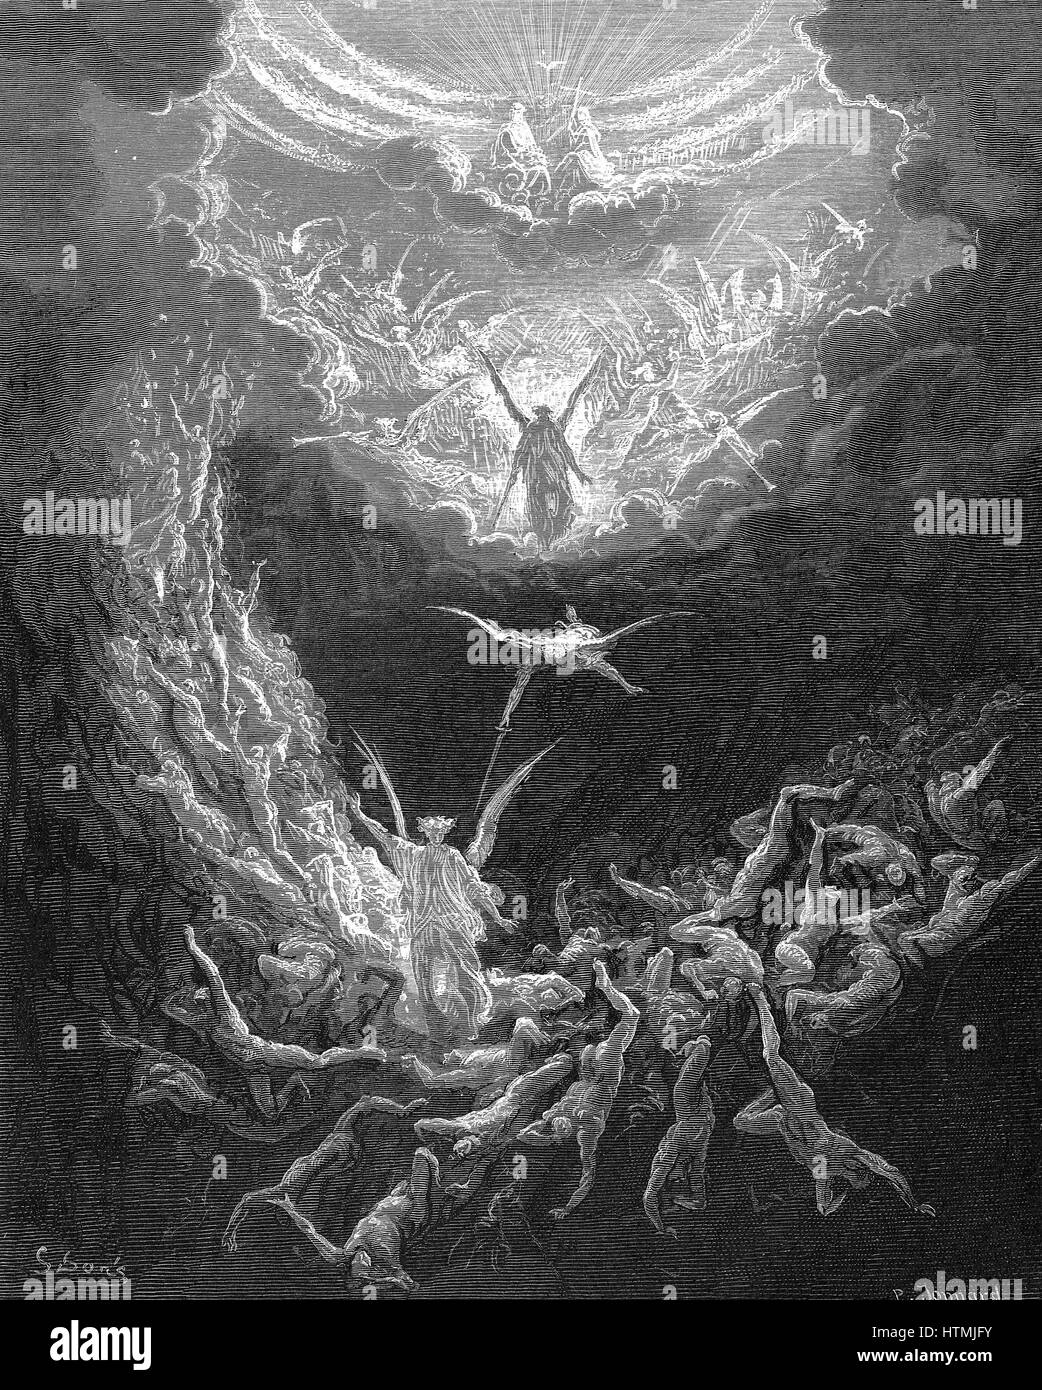 The Last Judgement. 'Bible' Book of Revelation 20:11. Illustration by Gustave Dore 1865-6. Wood engraving Stock Photo